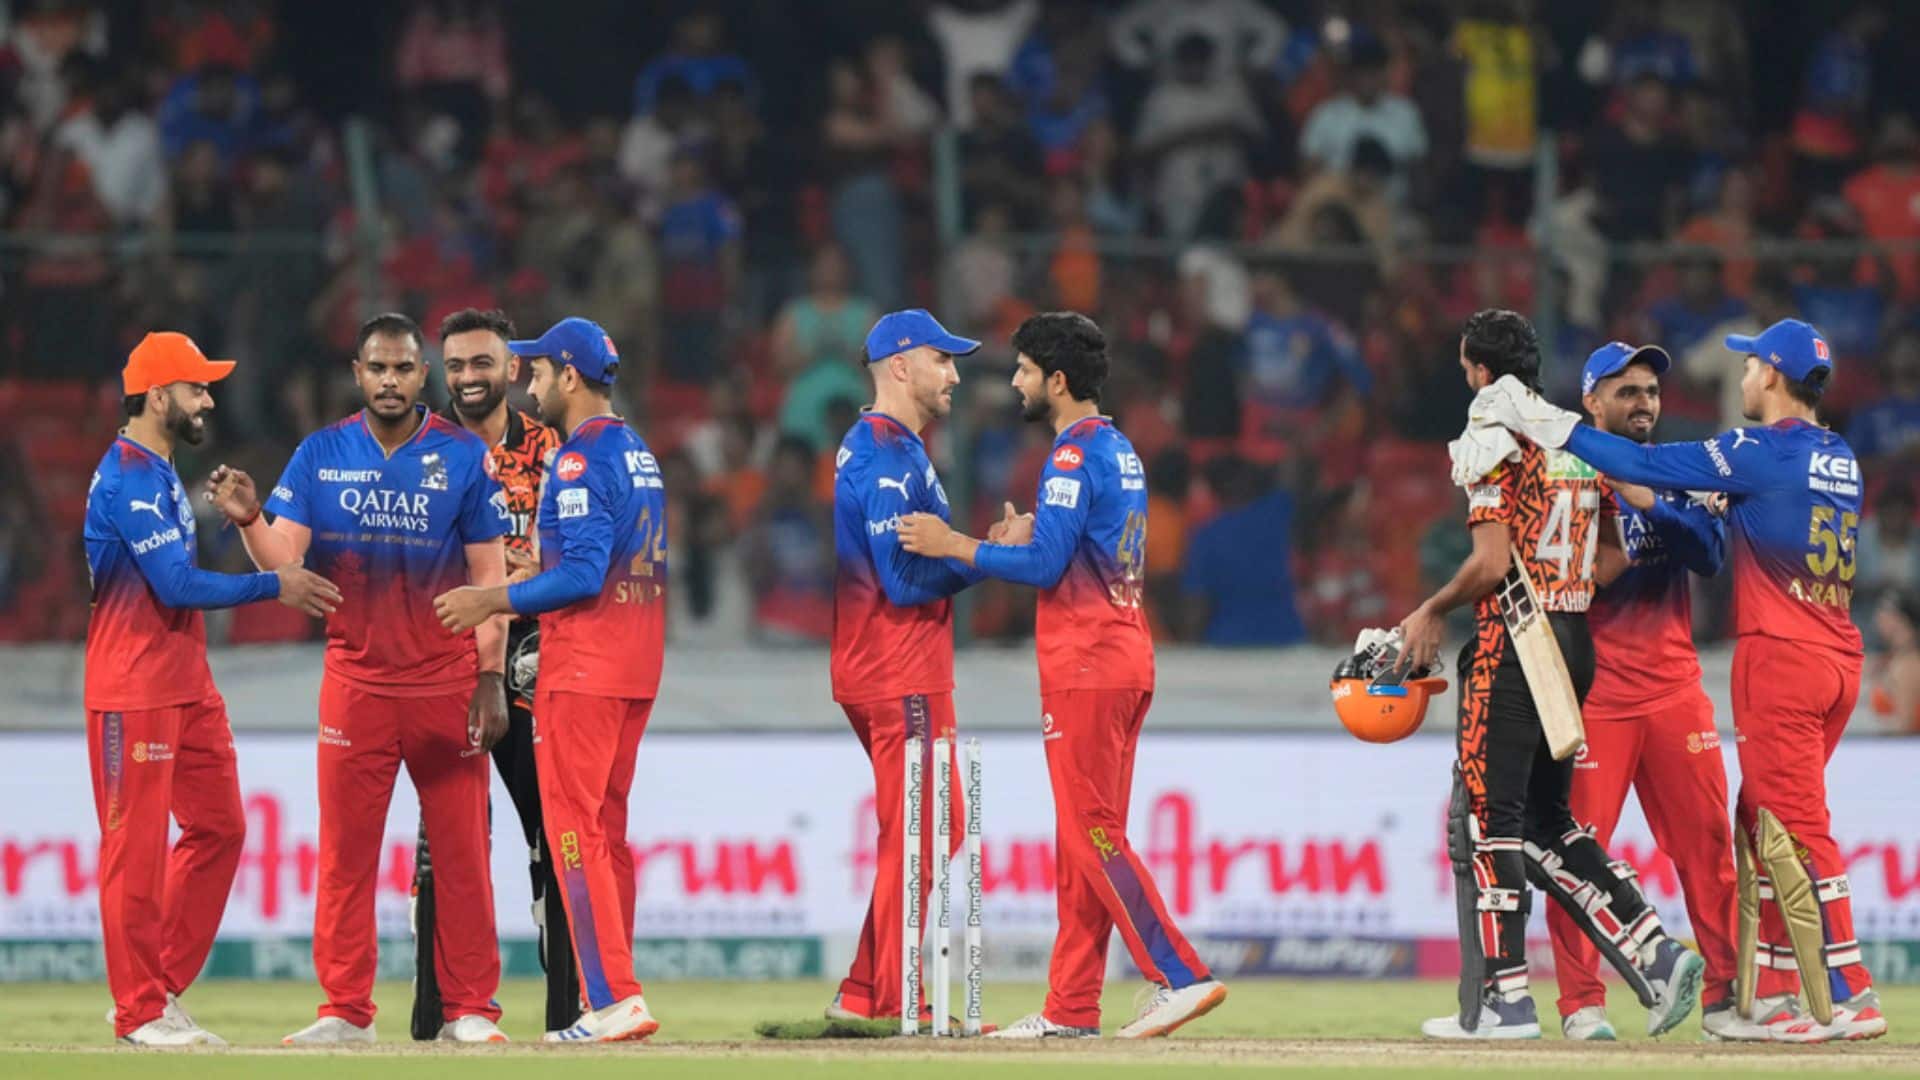 RCB defeated SRH by 35 runs [AP]